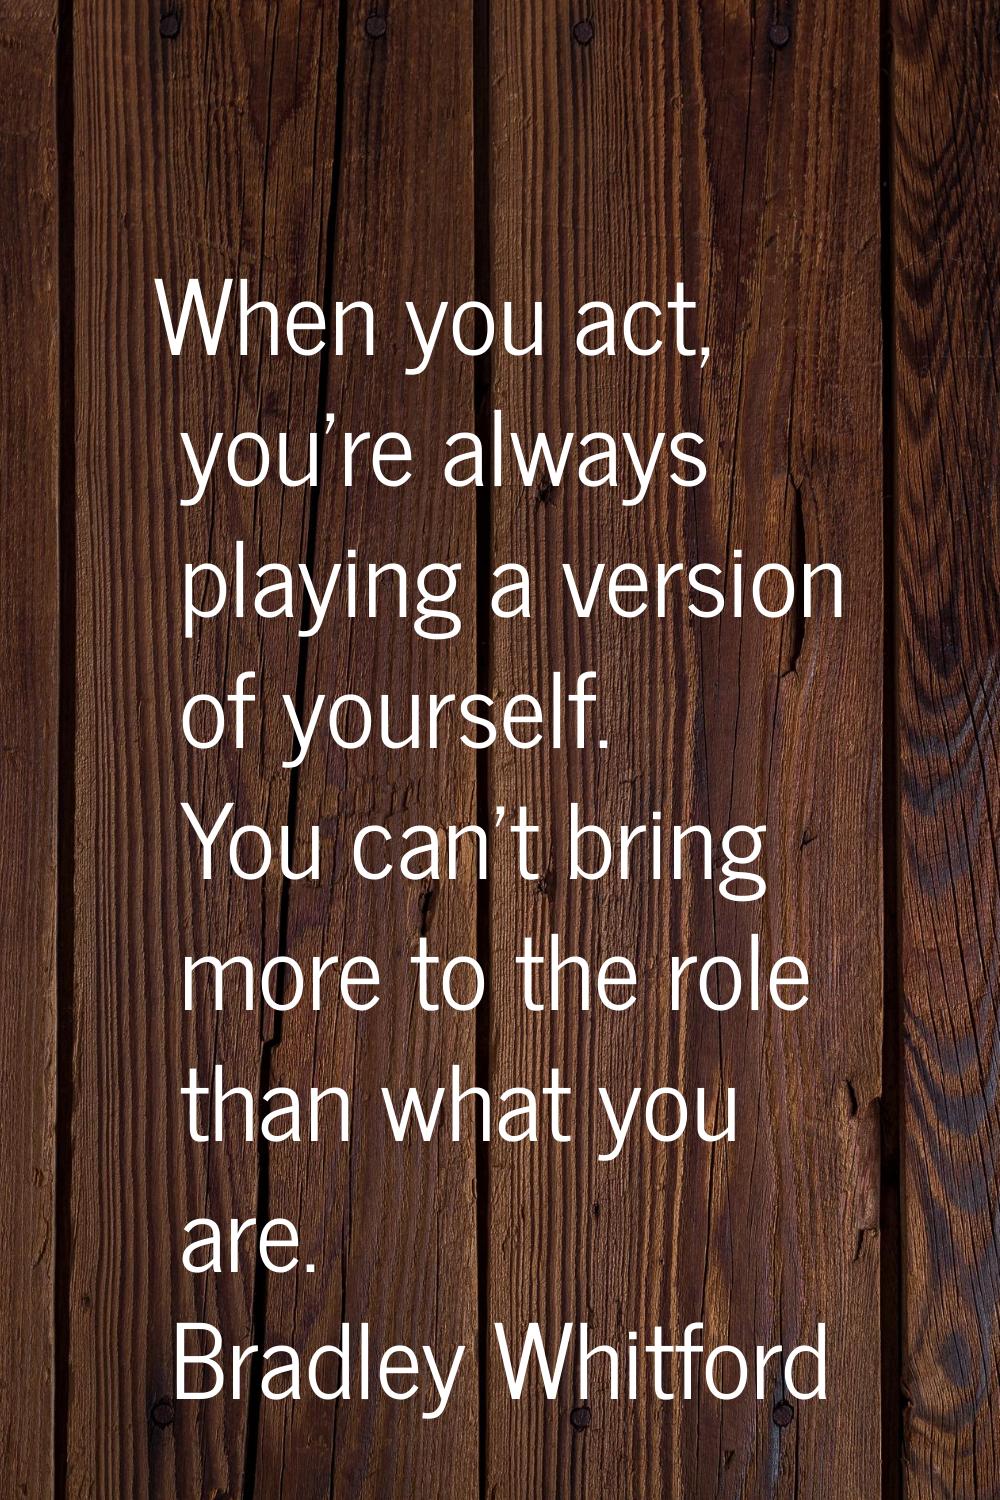 When you act, you're always playing a version of yourself. You can't bring more to the role than wh